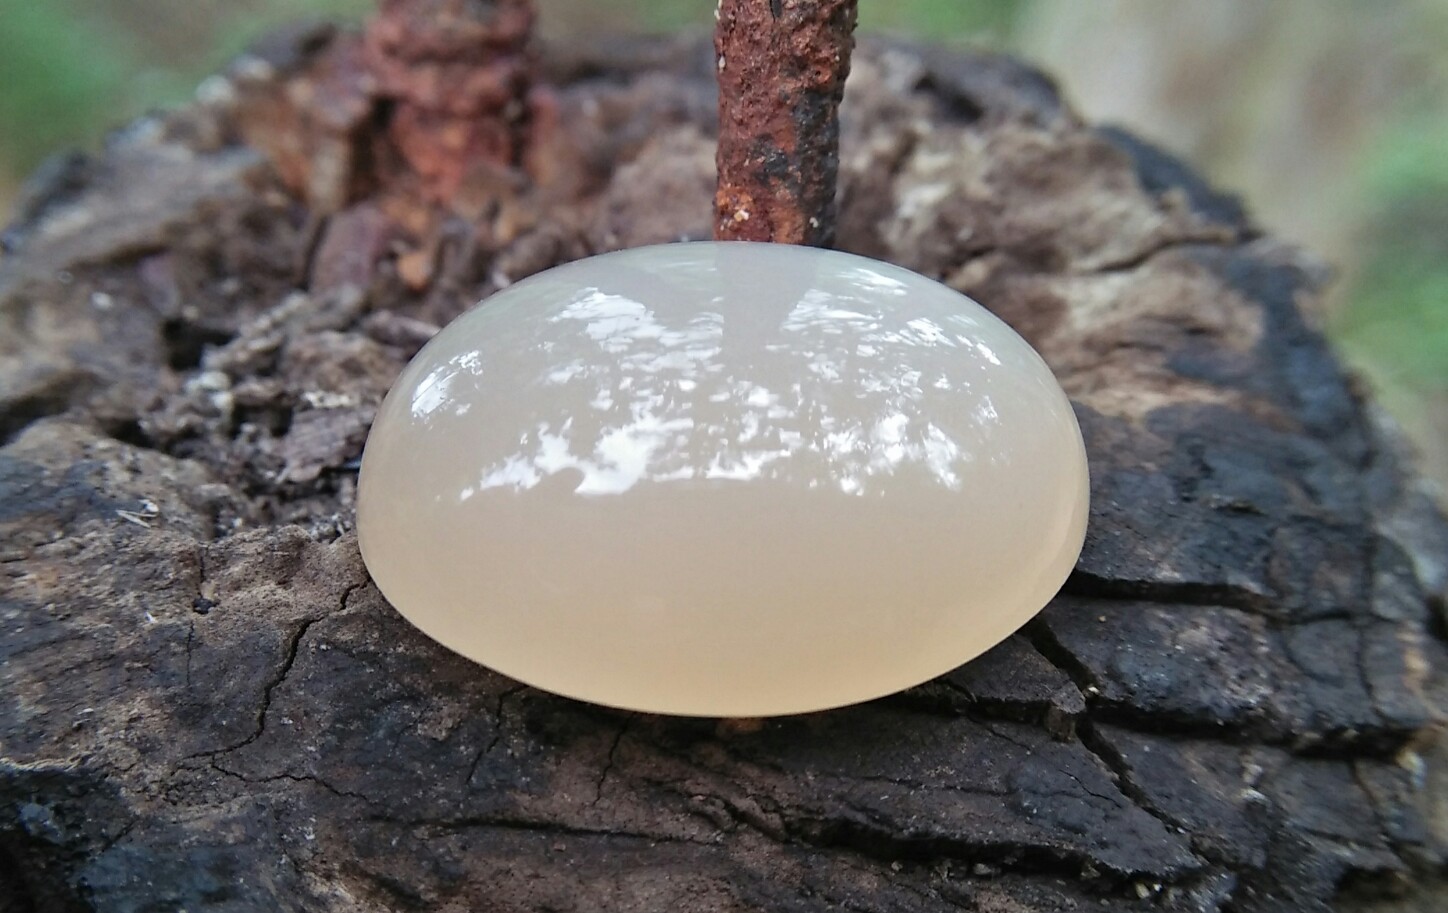 🇱🇰 Ceylon Natural Moonstone Cats Eye Creamy Colour, 25.35cts, 22.5mm x 17.1mm x 9.1mm dimension stone unearthed from City of gem Ratnapura mineral Sri Lanka https://youtu.be/enDhTpVRggE